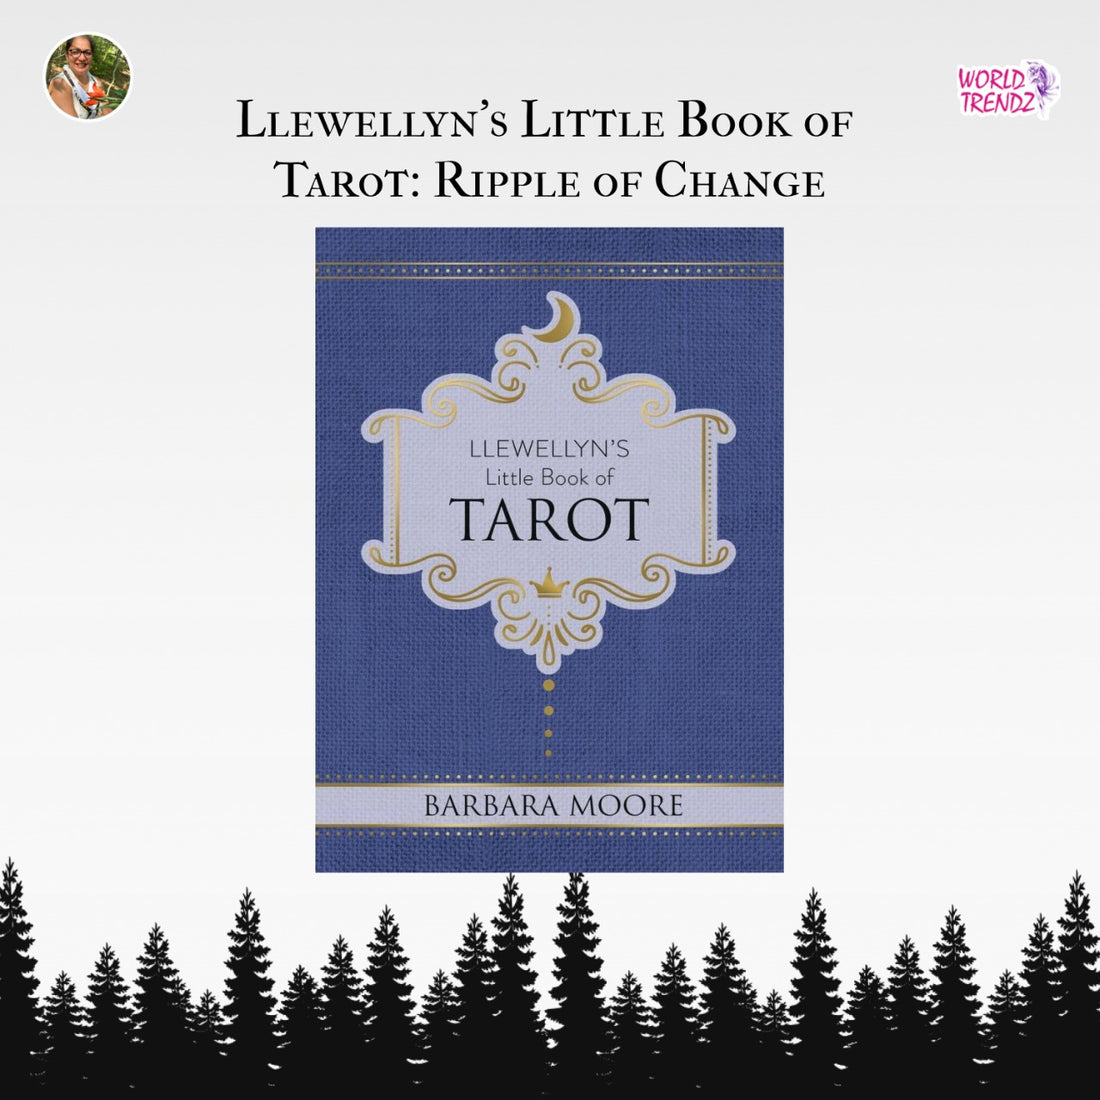 Resources That'll Make You Better at Llewellyn's Little Book Of Tarot